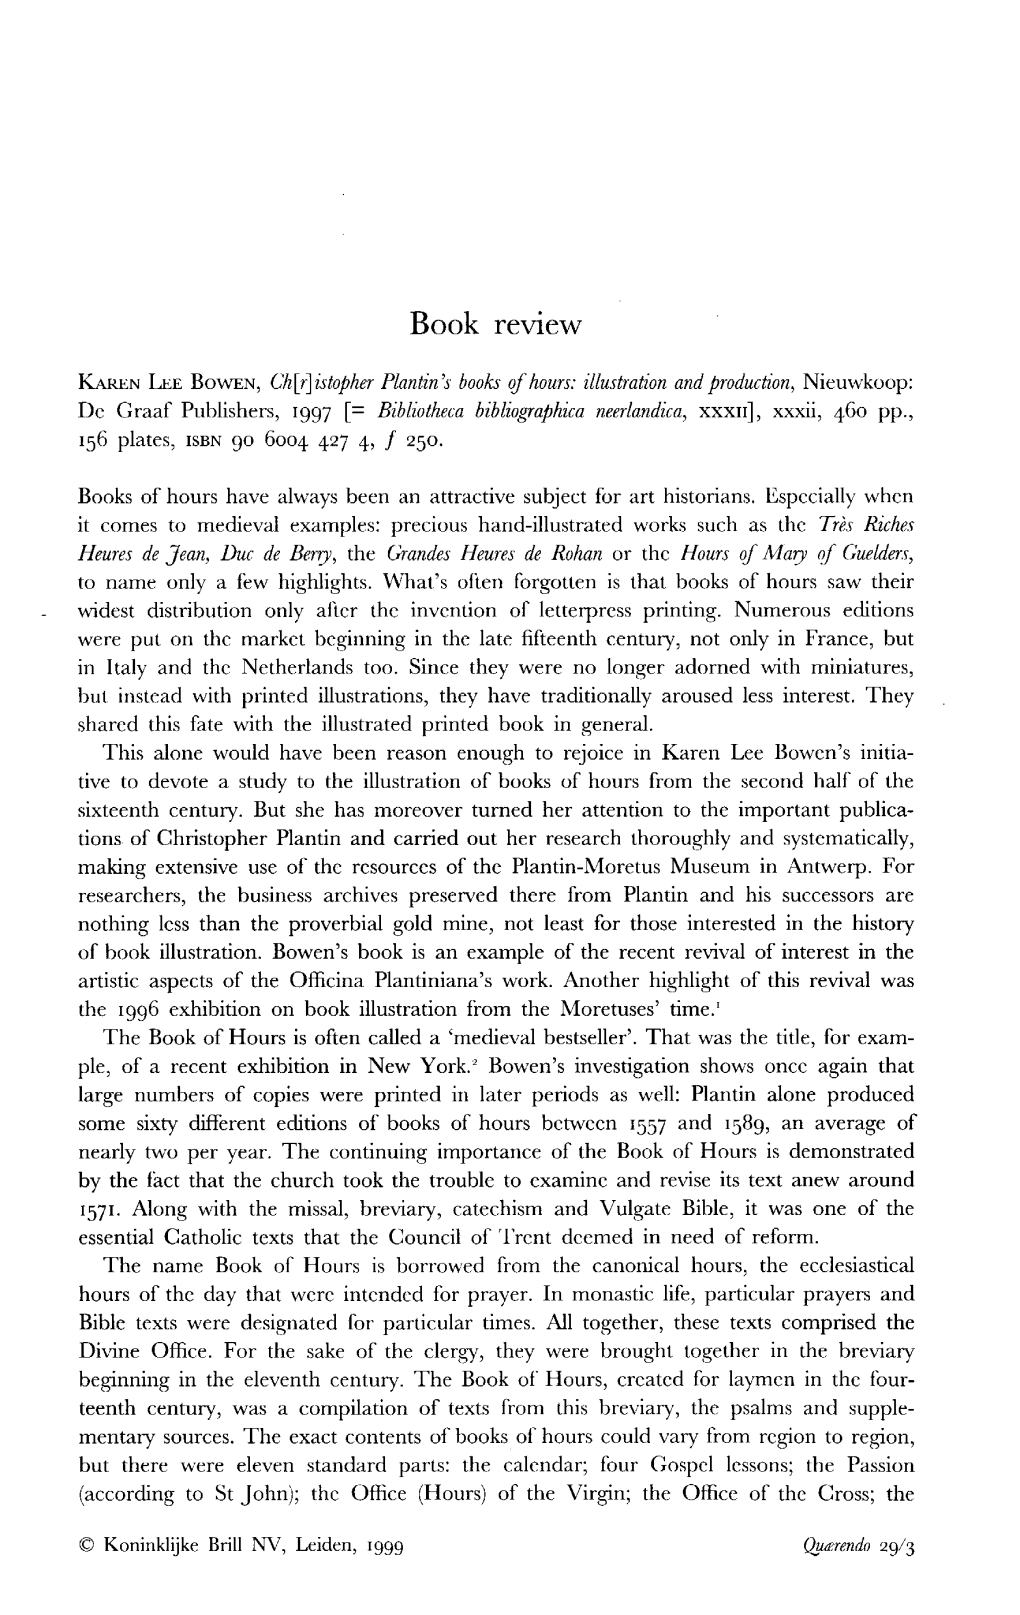 Book Review KAREN LEE BOWEN, Ch[R]Istopher Plantin's Books of Hours